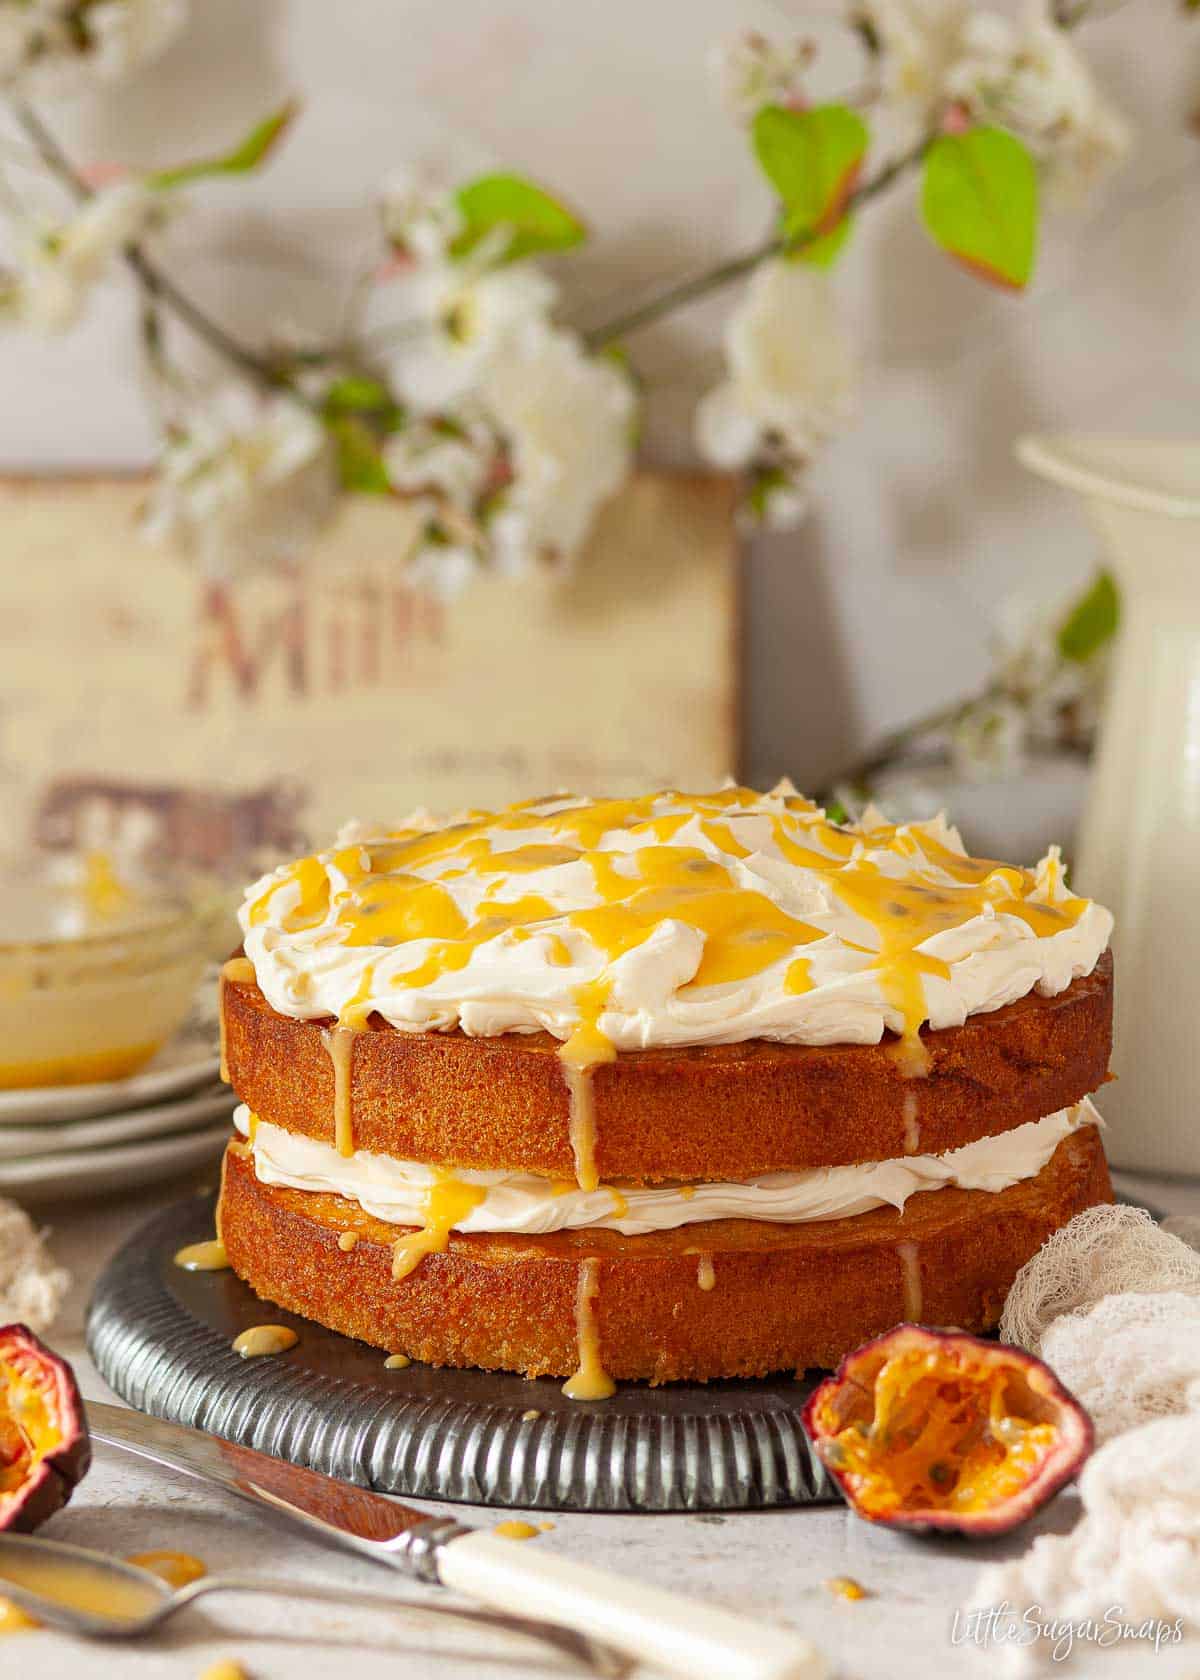 A passion fruit sponge cake with mascarpone topping and passion curd.